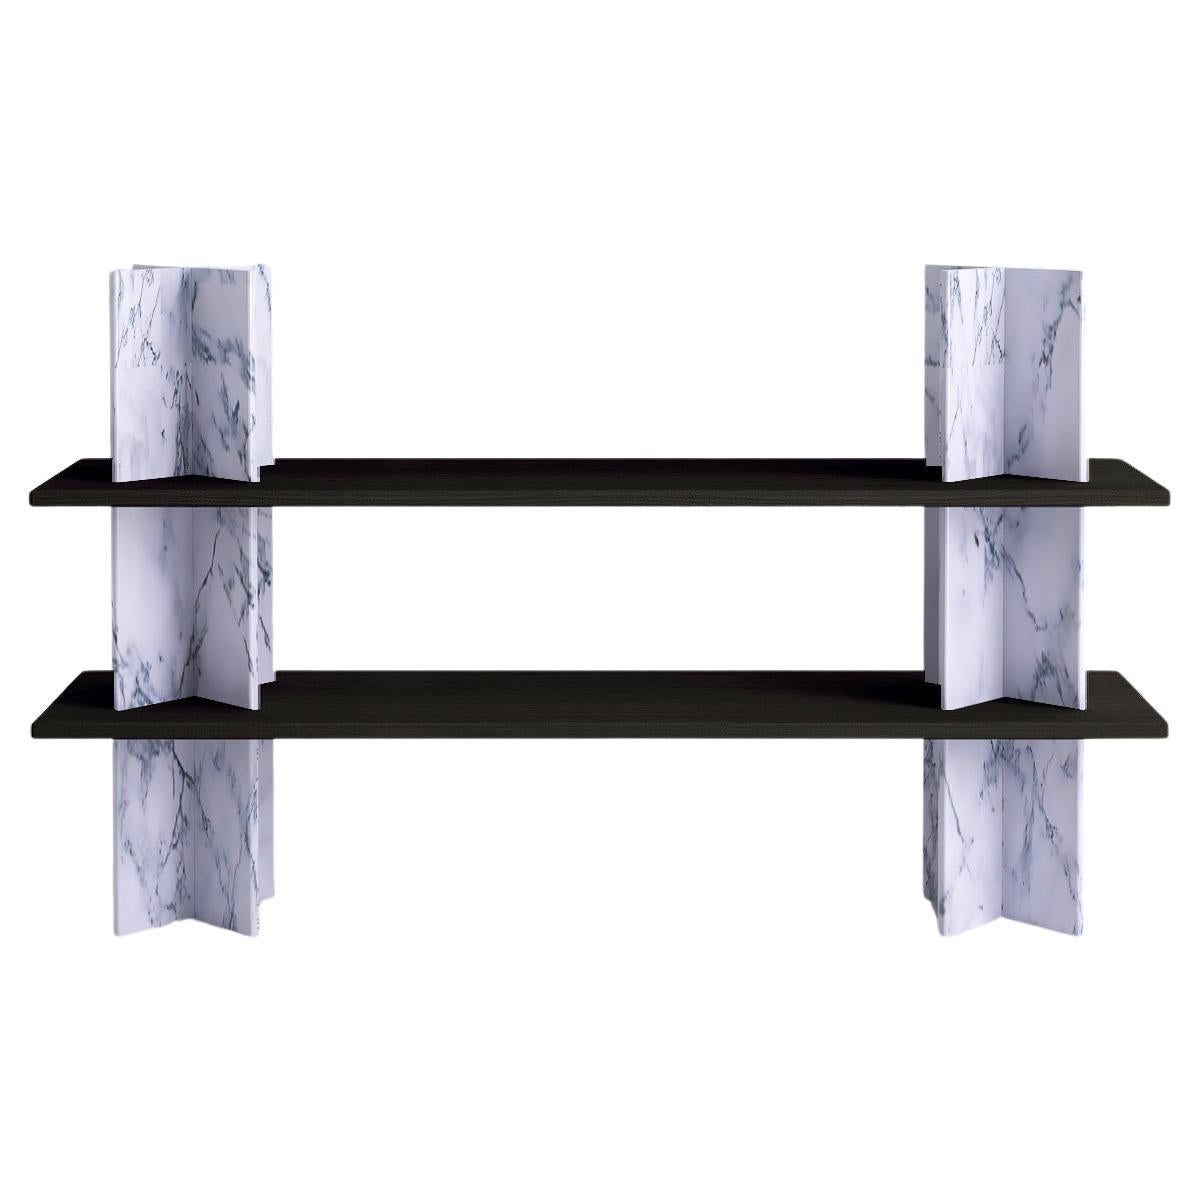 Monument Free Standing Shelf White Marble 'Pele De Tigre' Column, Black Stained For Sale